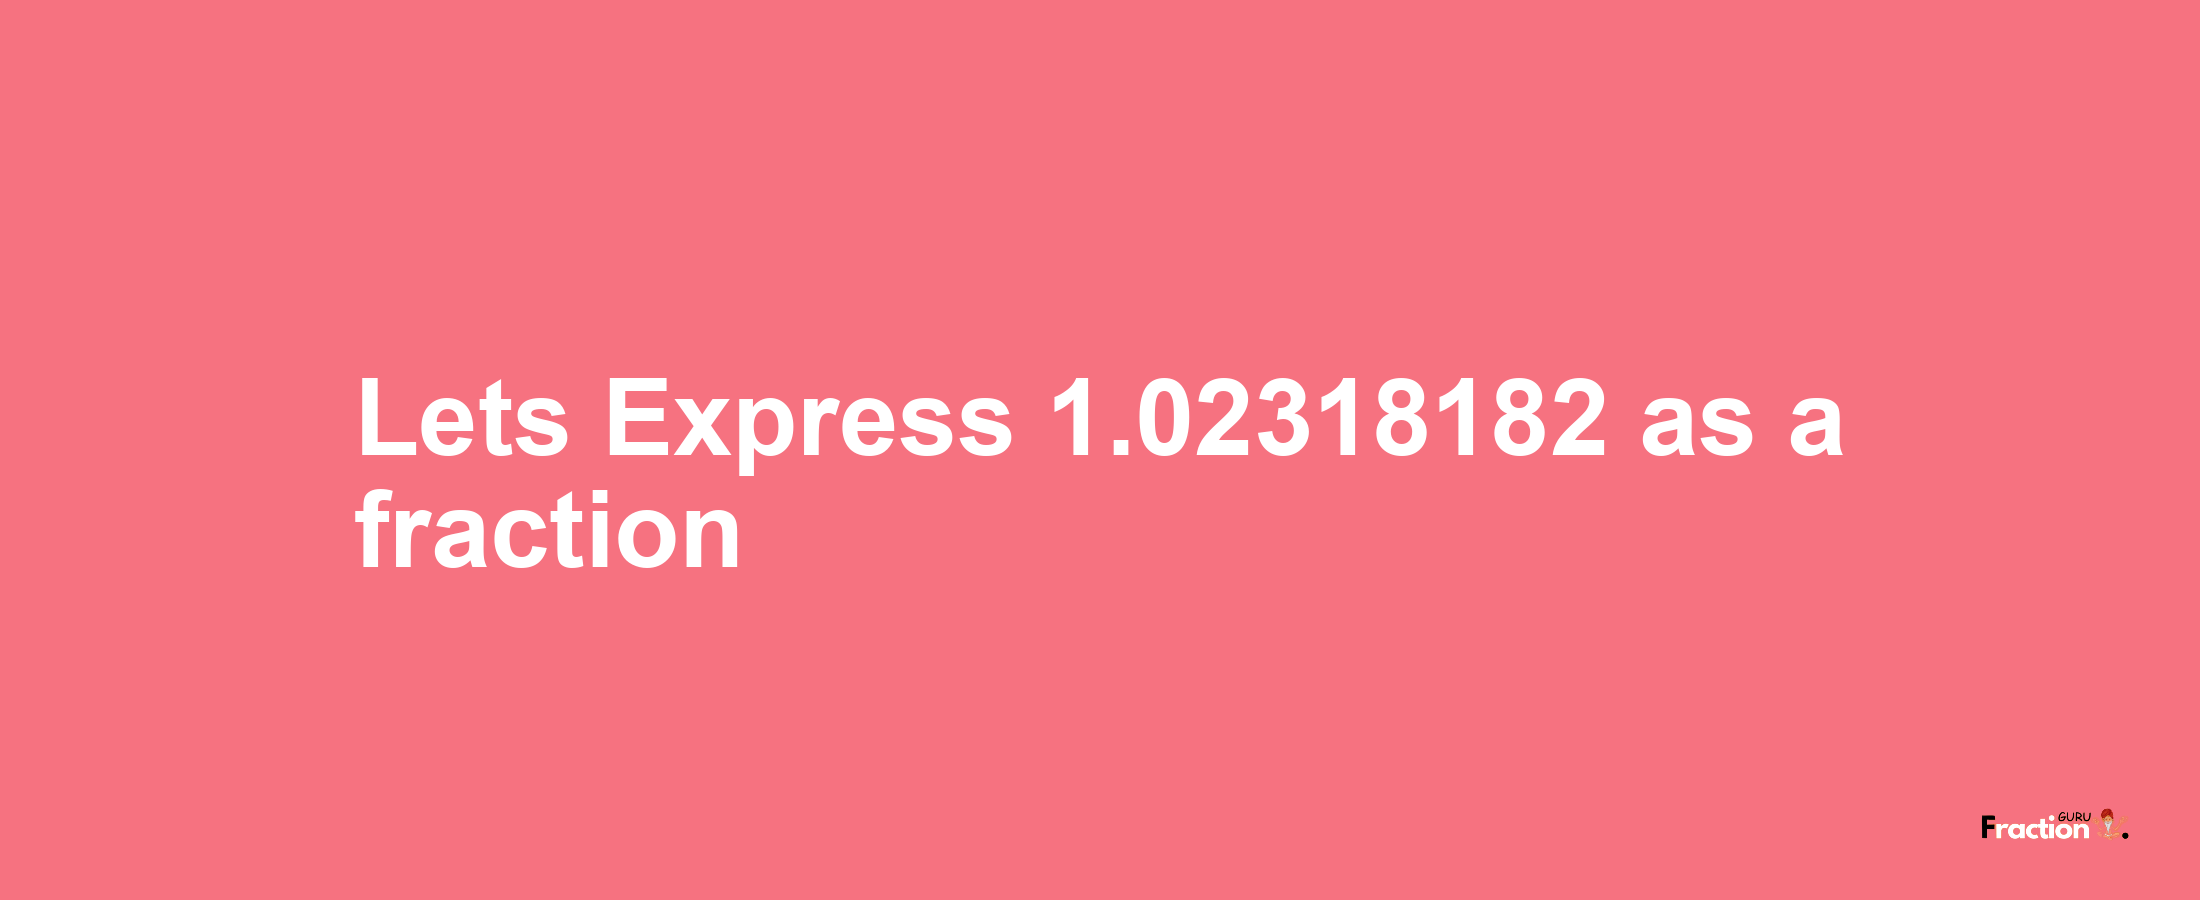 Lets Express 1.02318182 as afraction